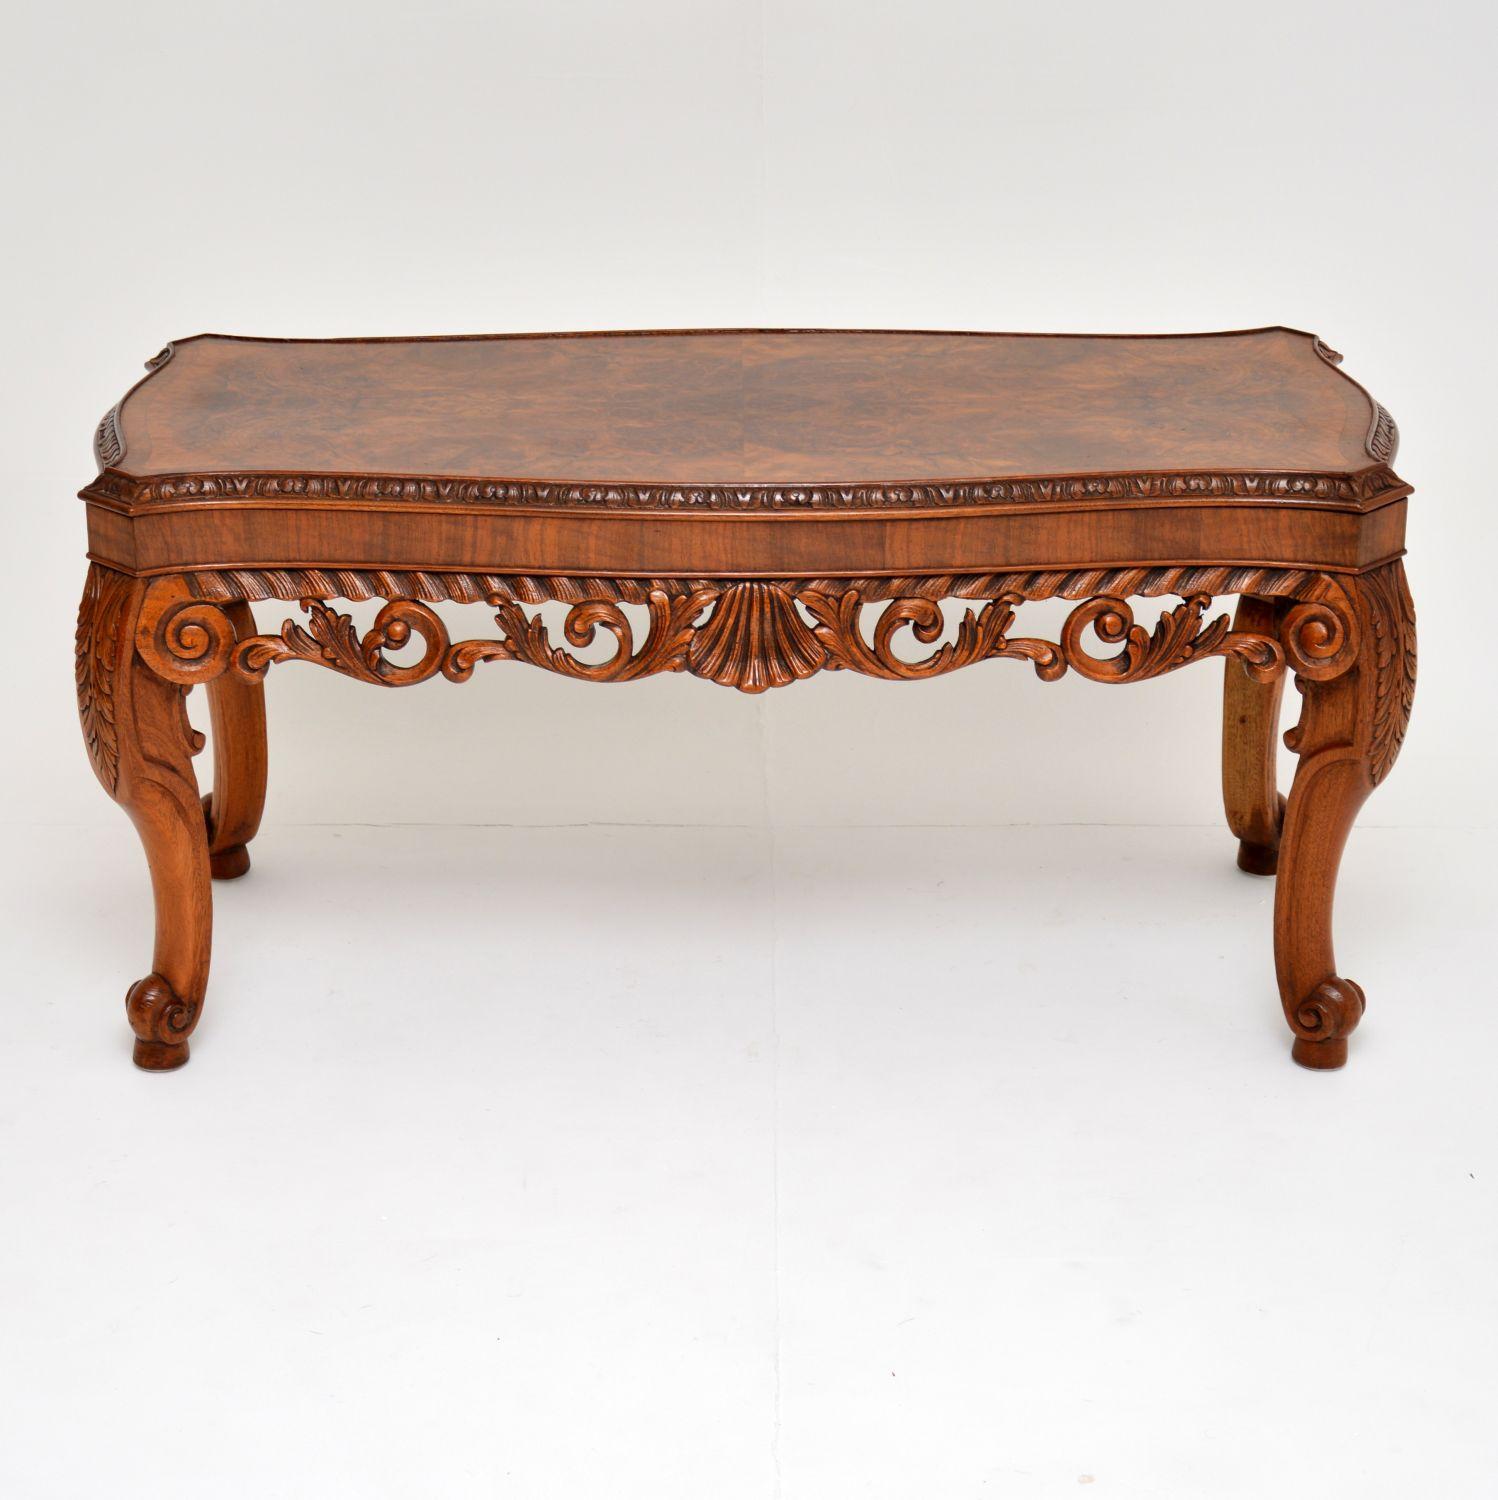 Fabulous quality antique Carolean style walnut coffee table with wonderful carved decorations.

The top surface is a well patterned burr walnut with a figured walnut crossbanded edge that’s carved outside. The rest of the carving is stunning &